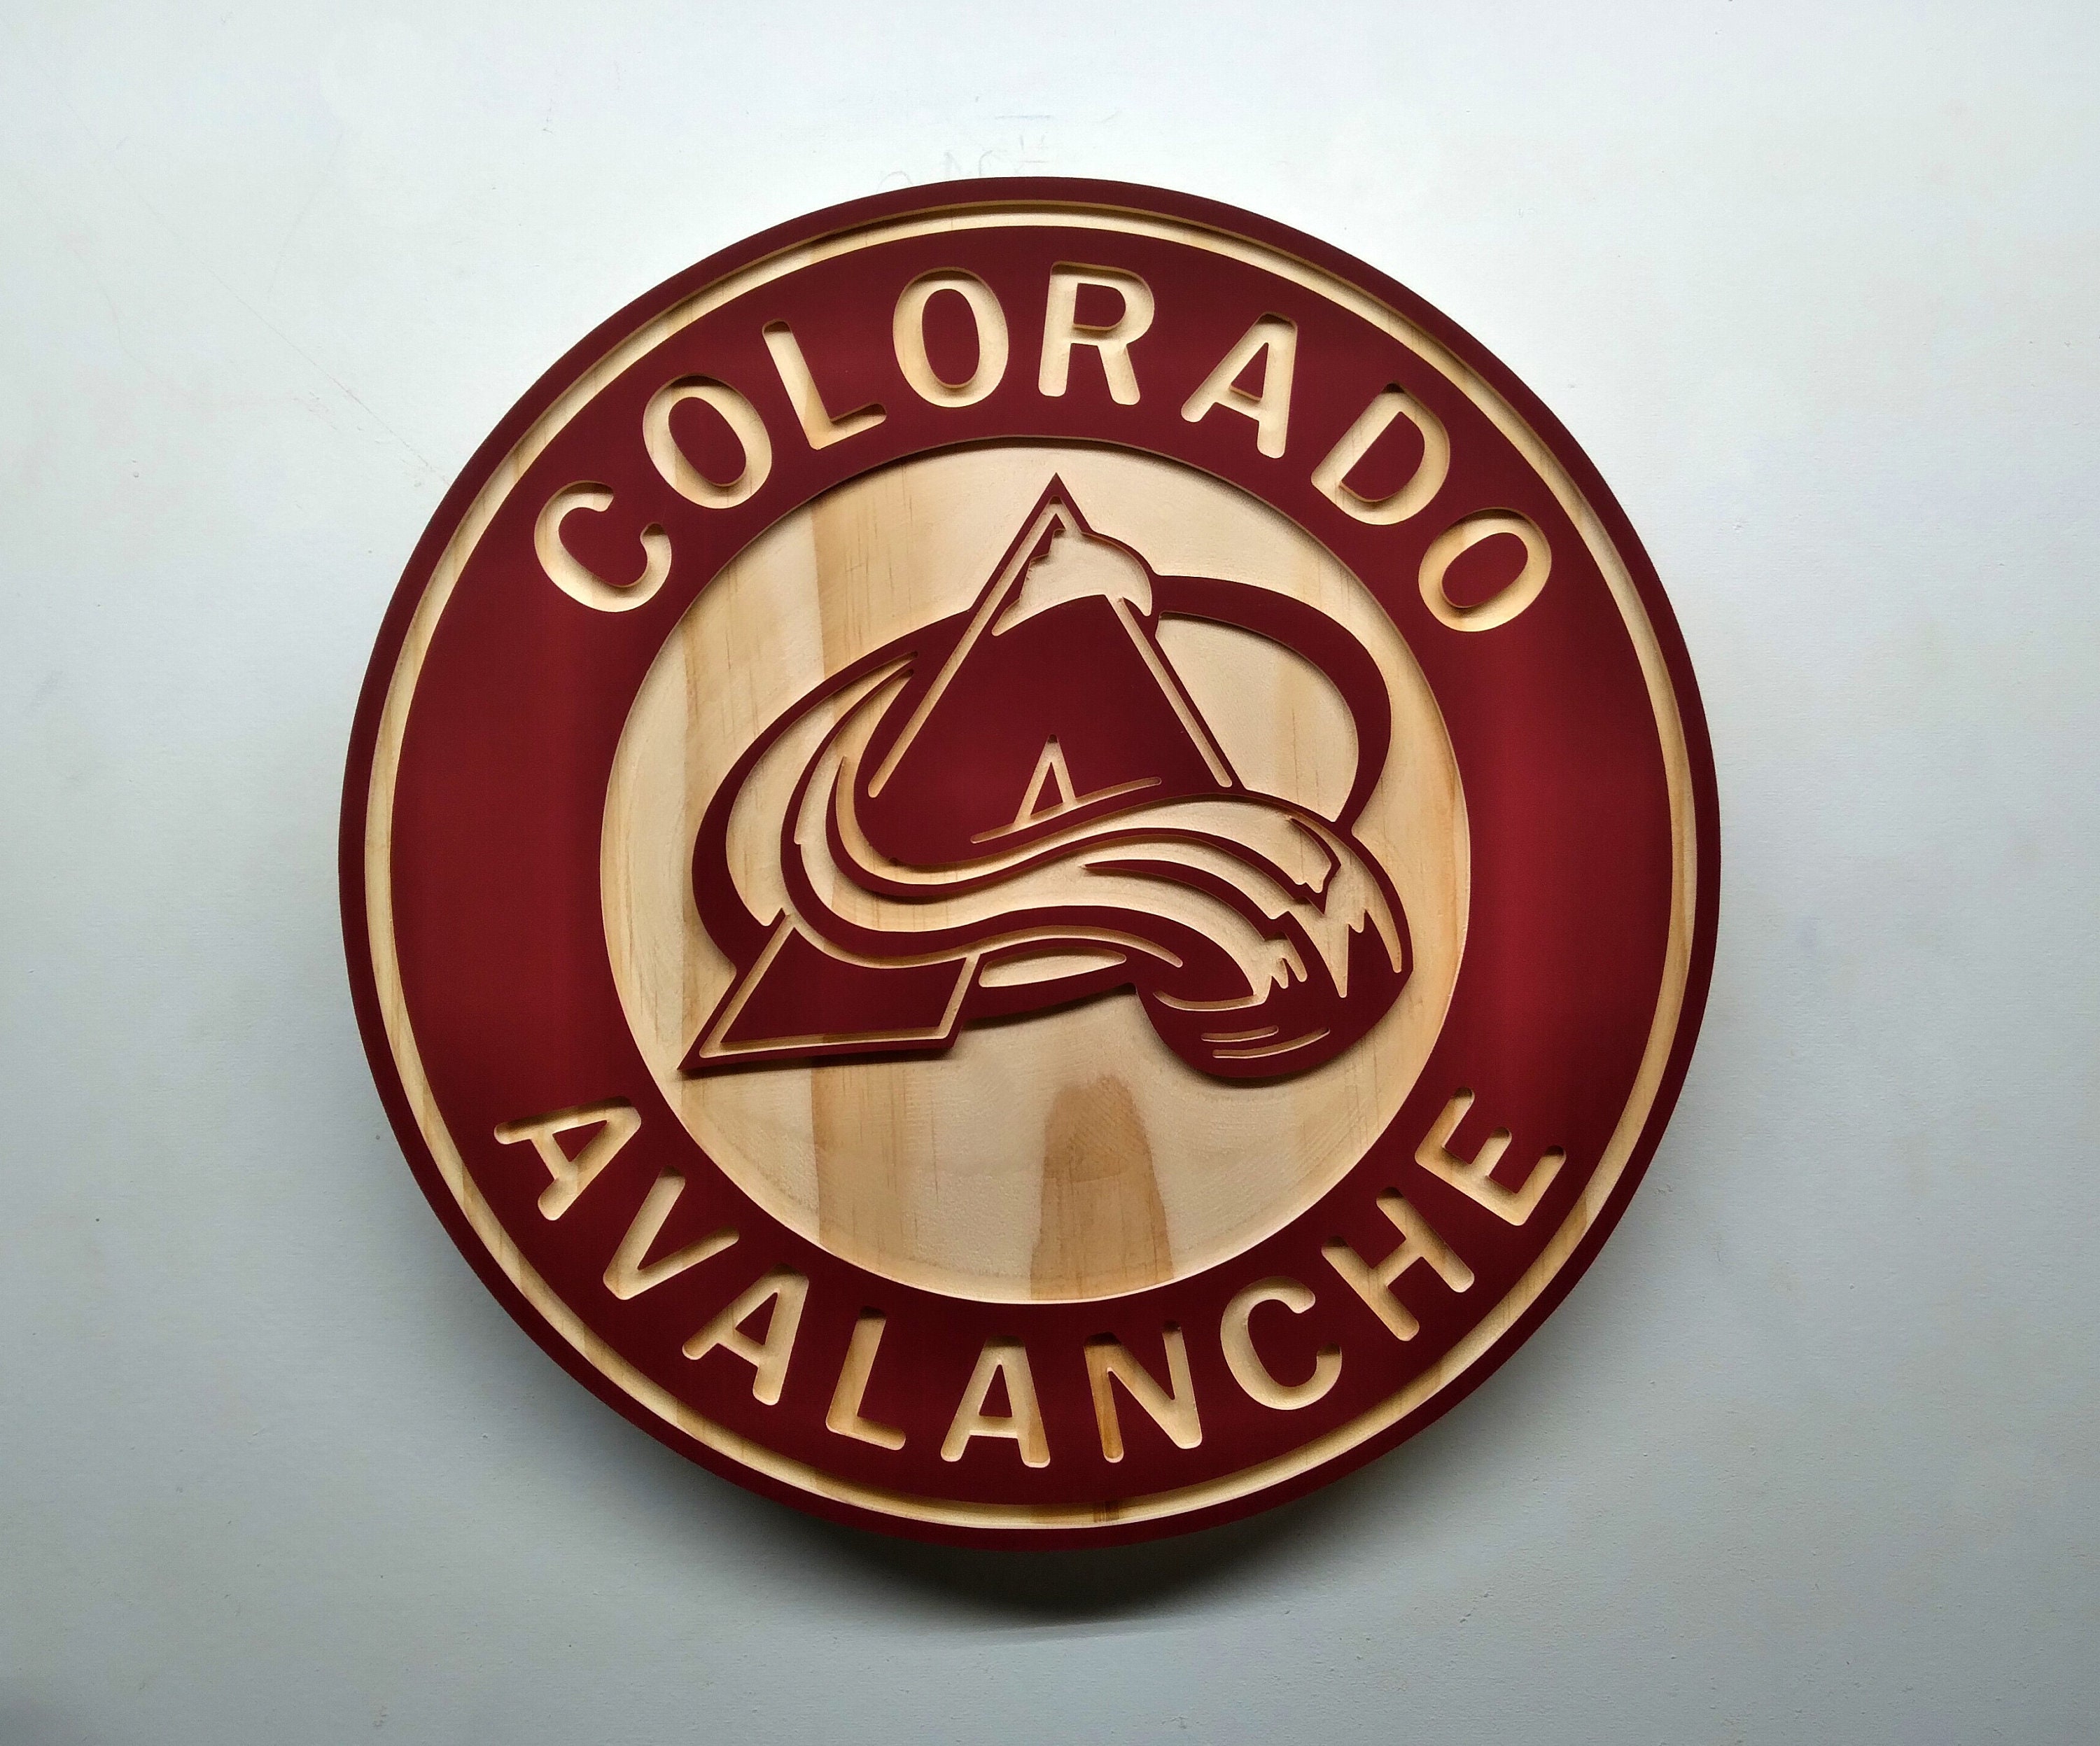 Colorado is the destination Miles Wood wanted, and the Avalanche made sure  he got here. : r/ColoradoAvalanche